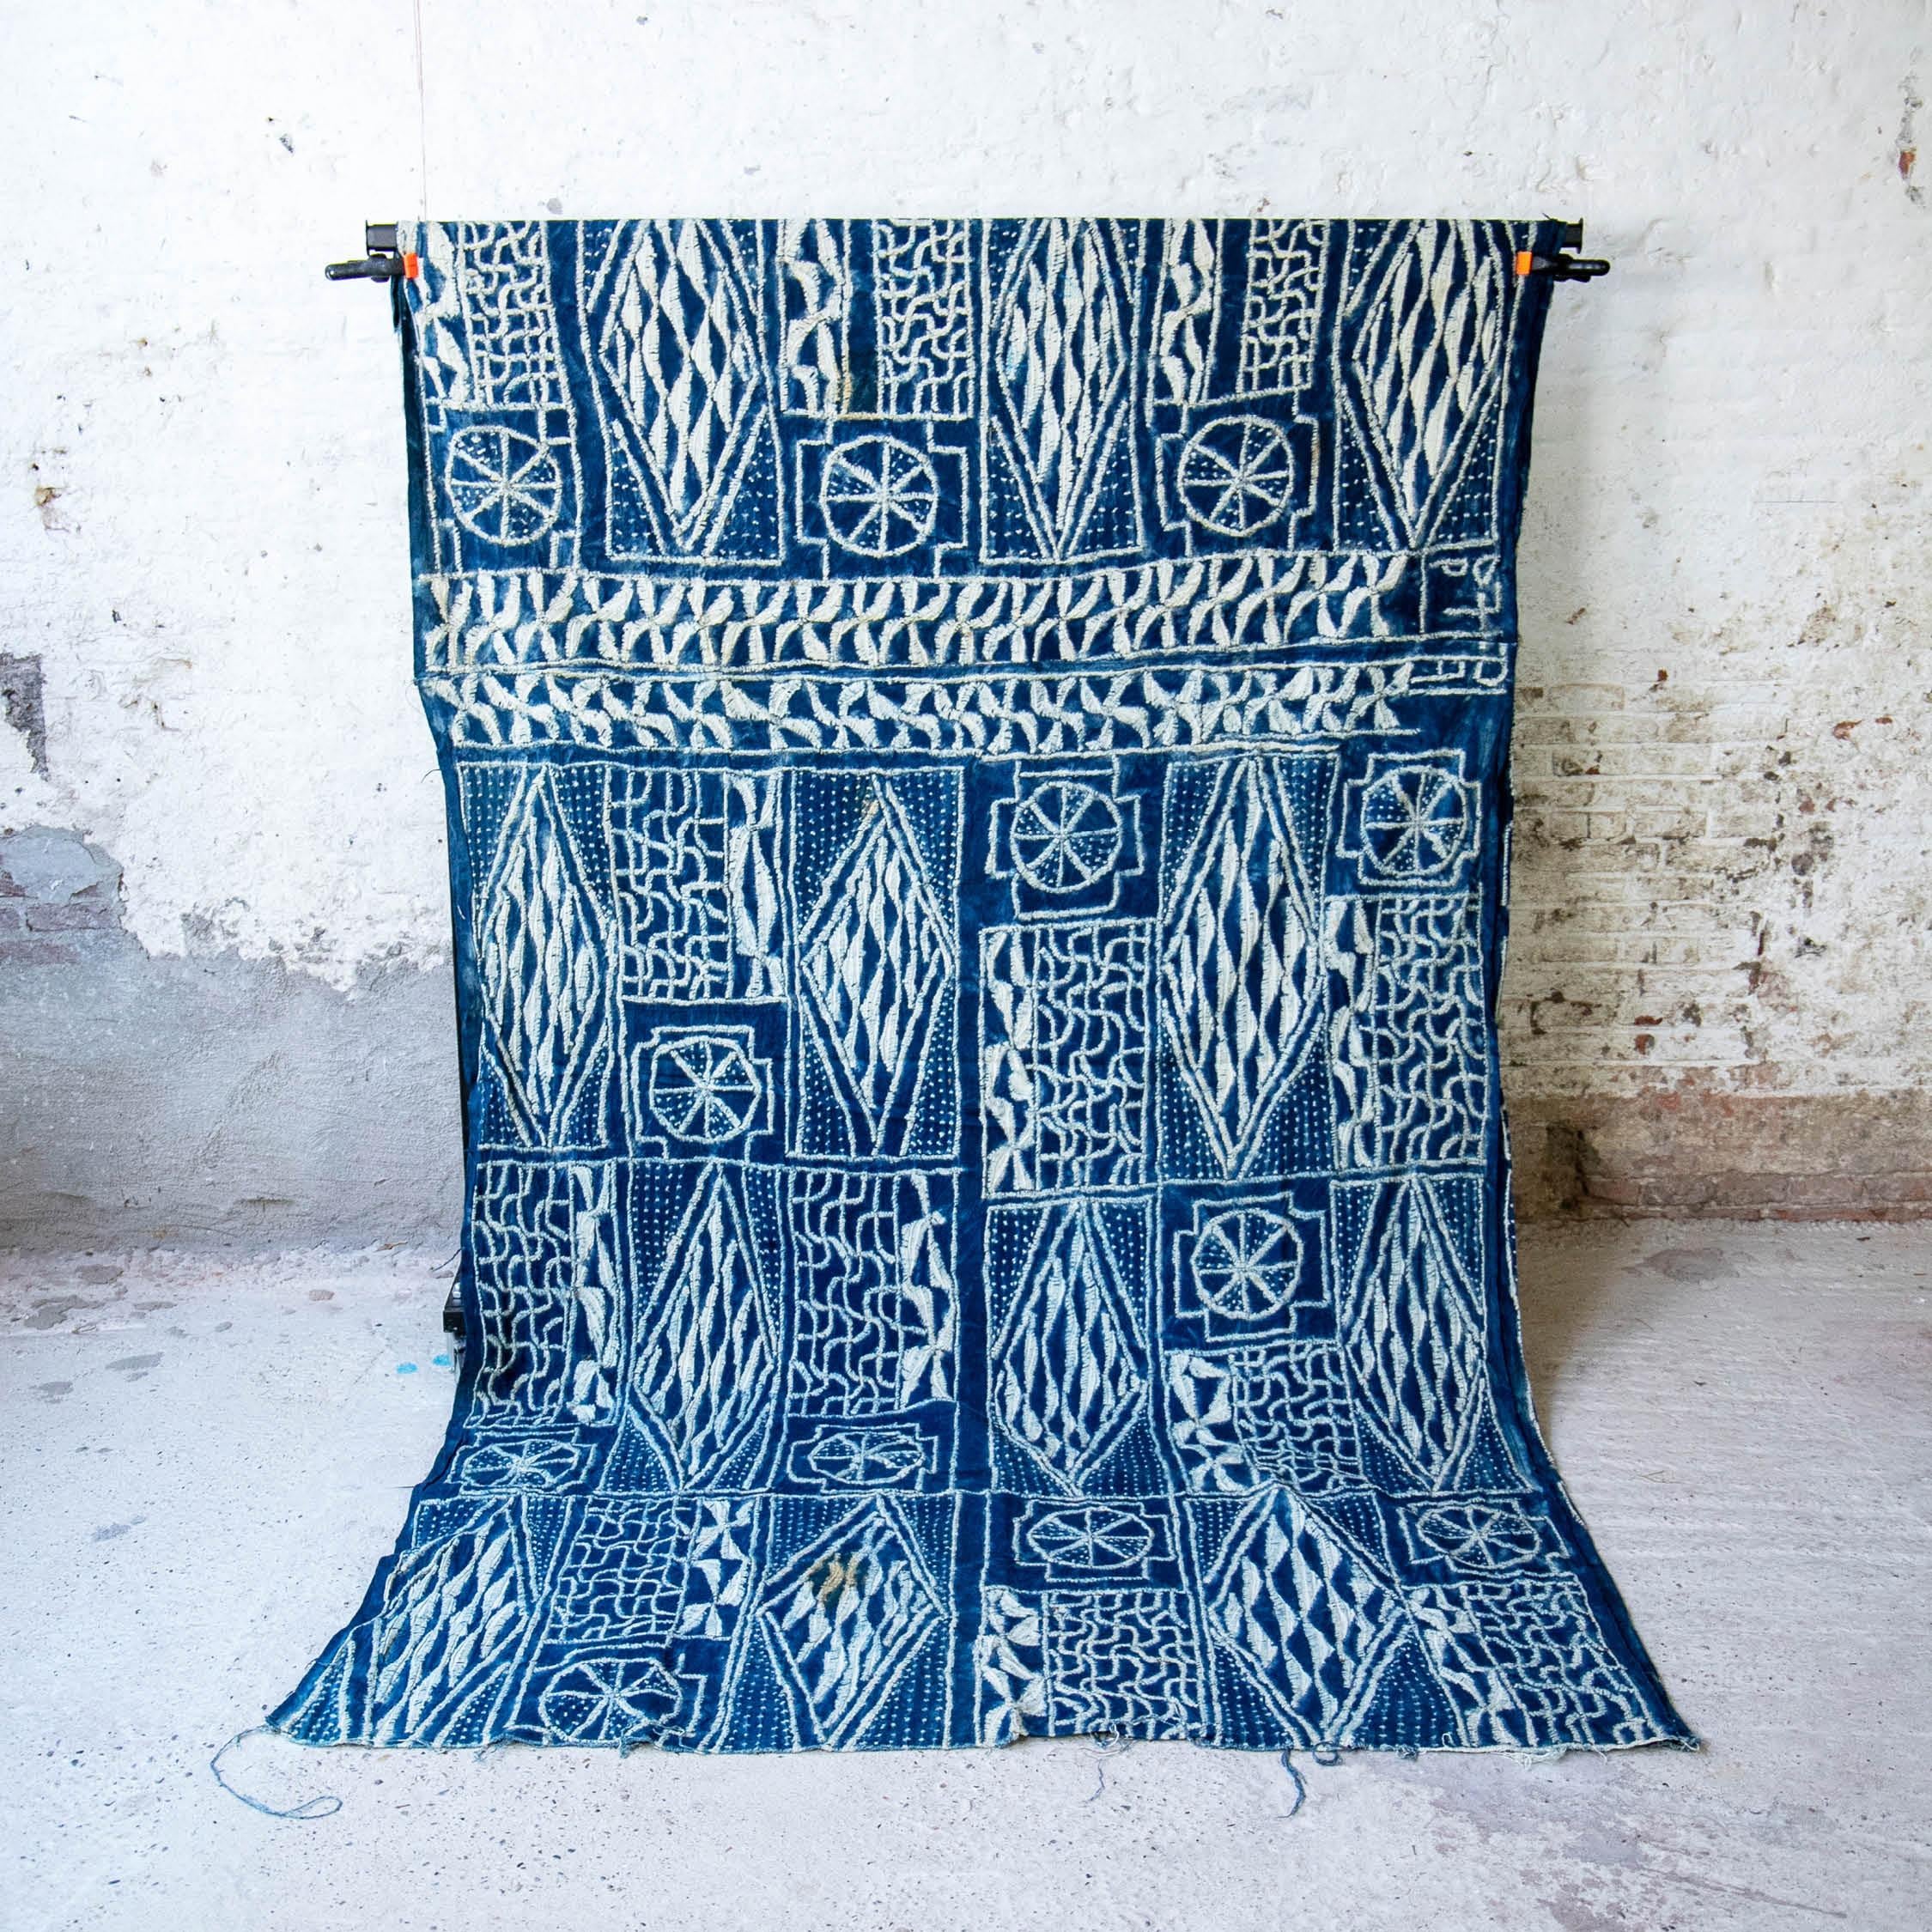 Cameroonian Large Vintage ‘Ndop’ Indigo Cloth or Textile Mid 20th C or Earlier   For Sale